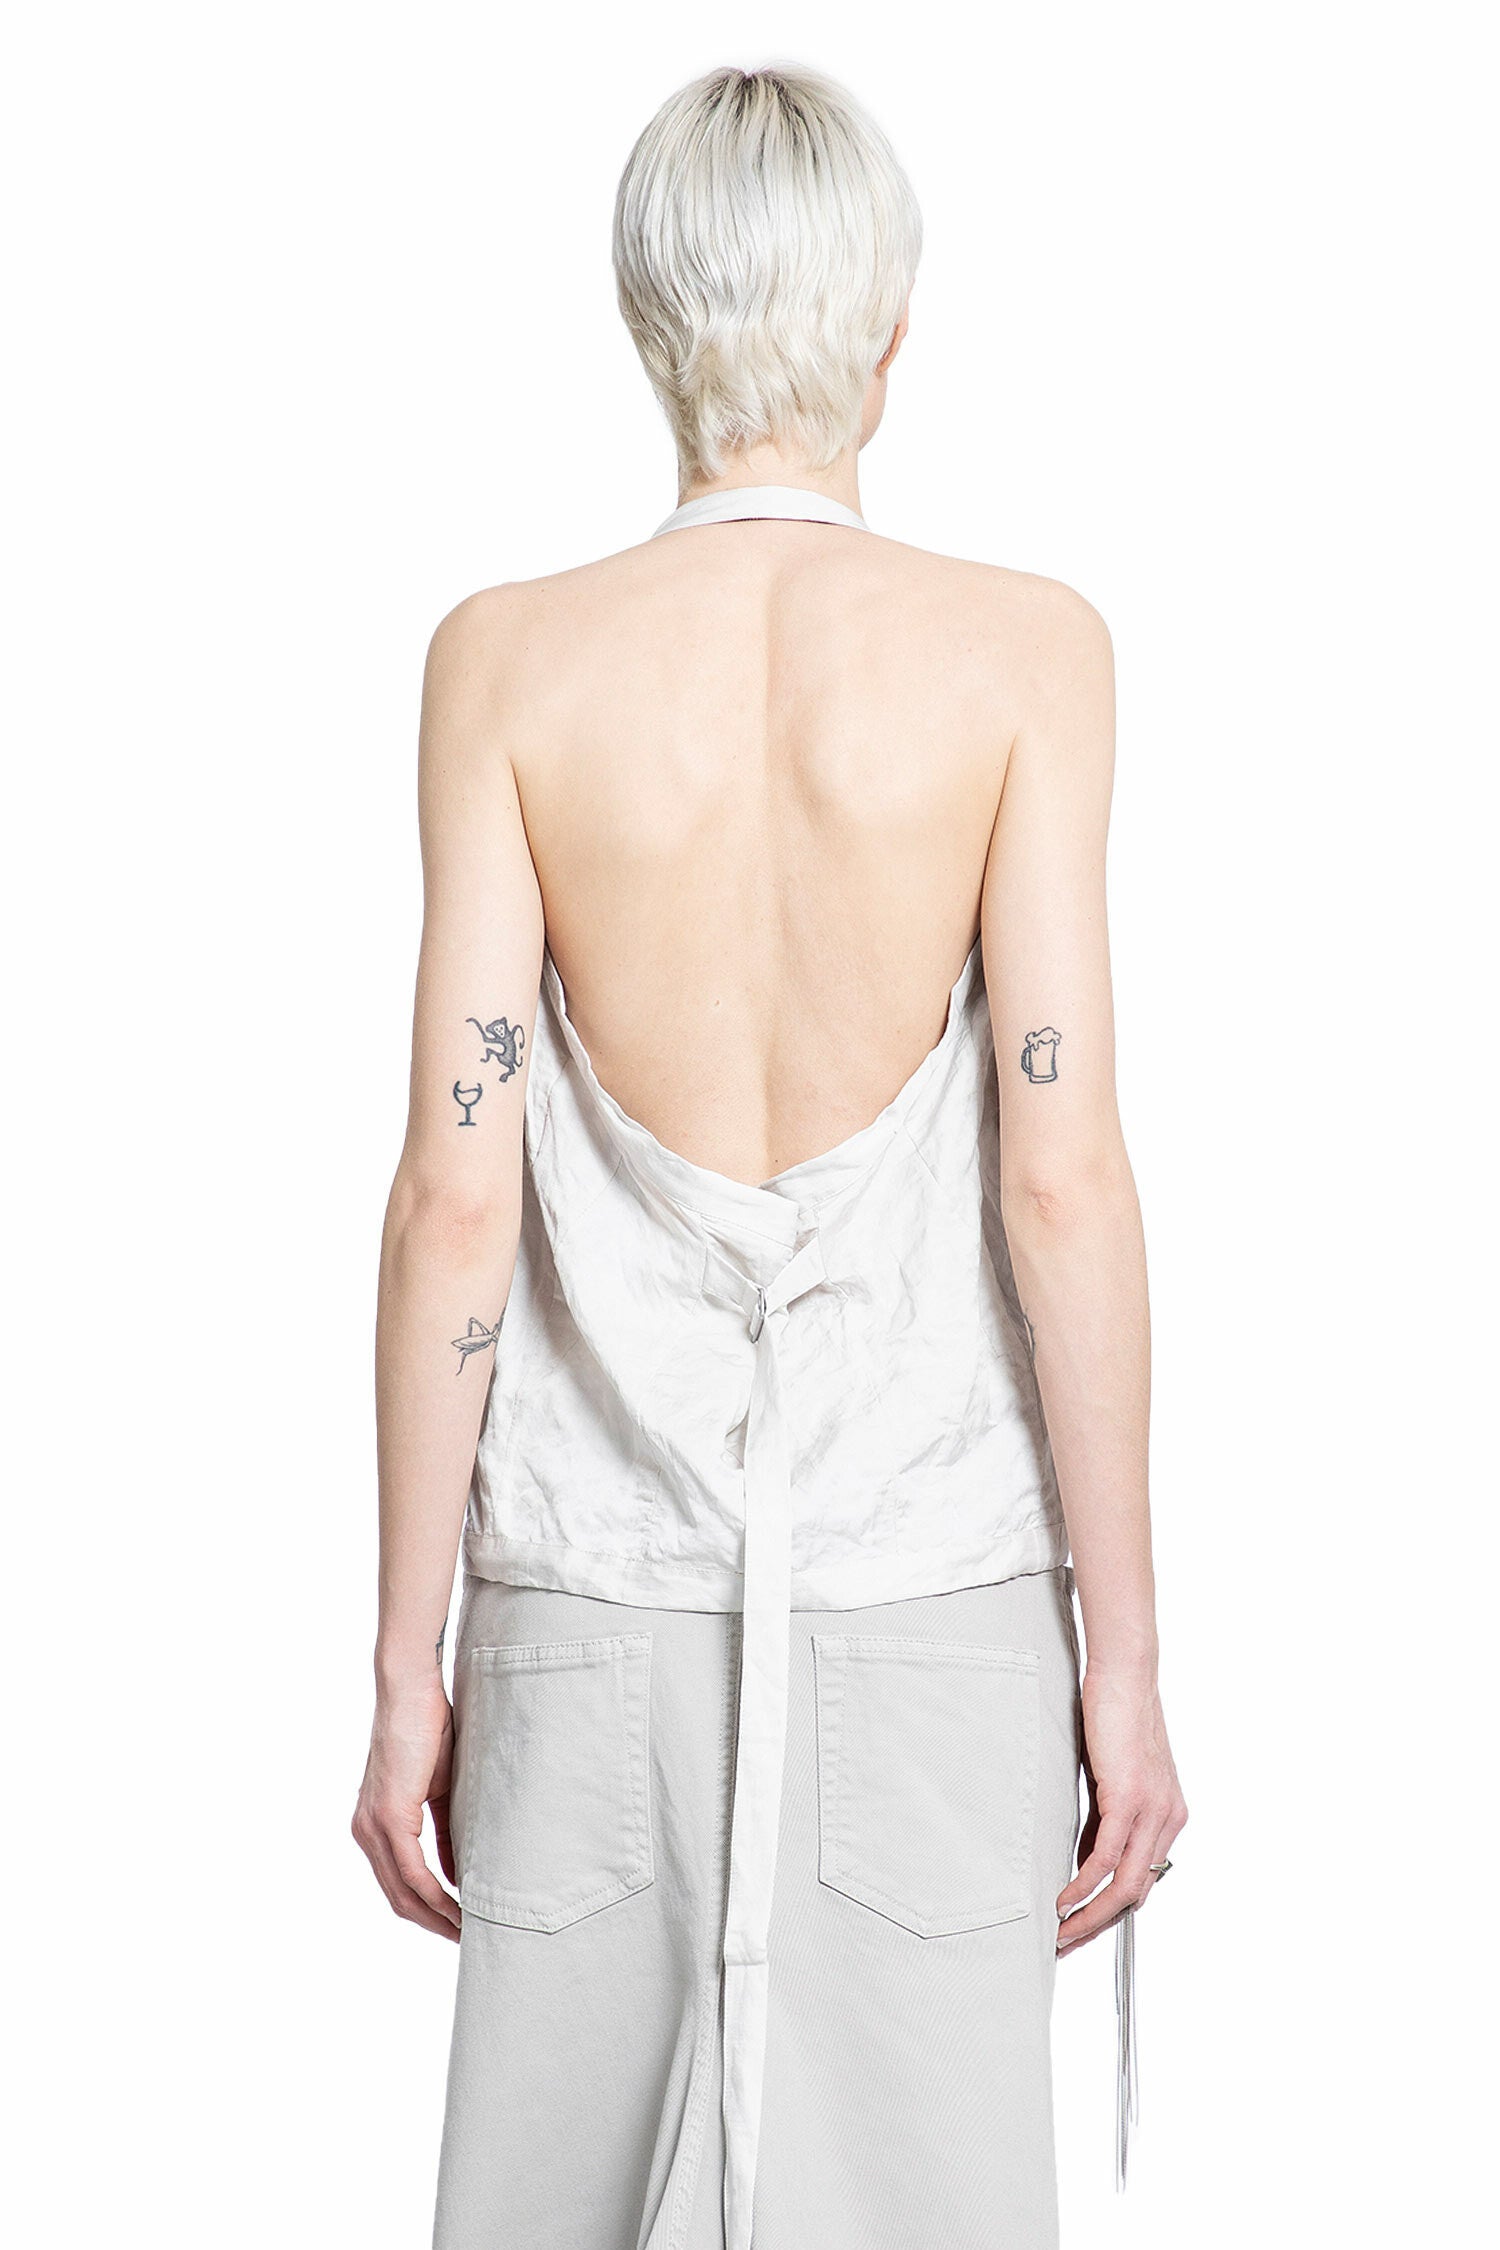 ANN DEMEULEMEESTER WOMAN OFF-WHITE VESTS